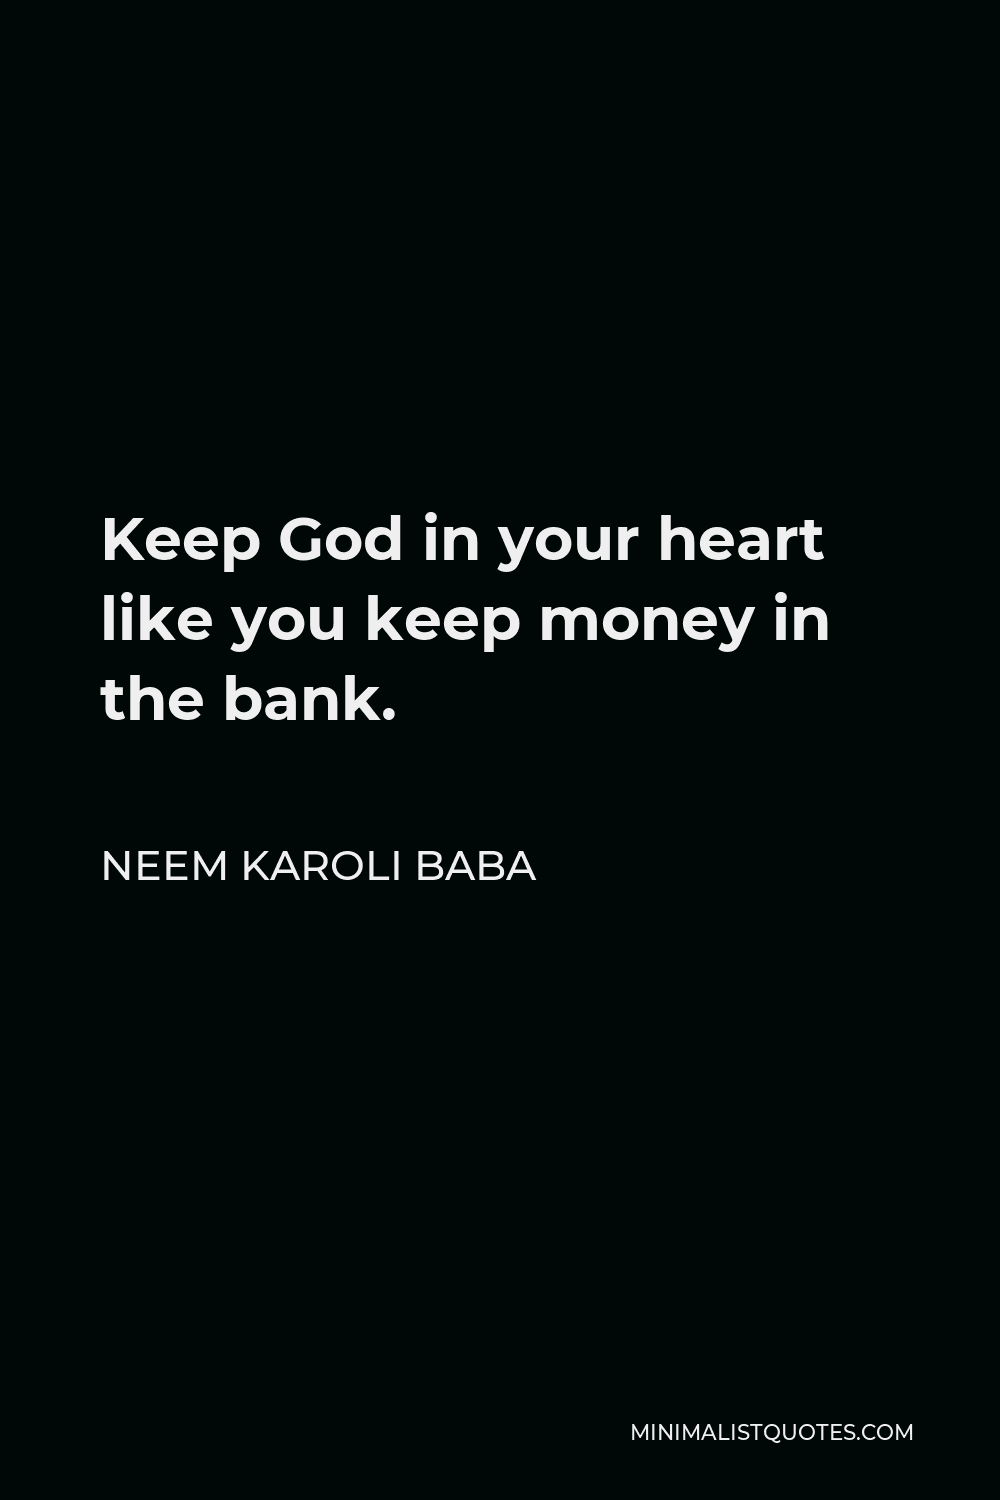 Neem Karoli Baba Quote - Keep God in your heart like you keep money in the bank.